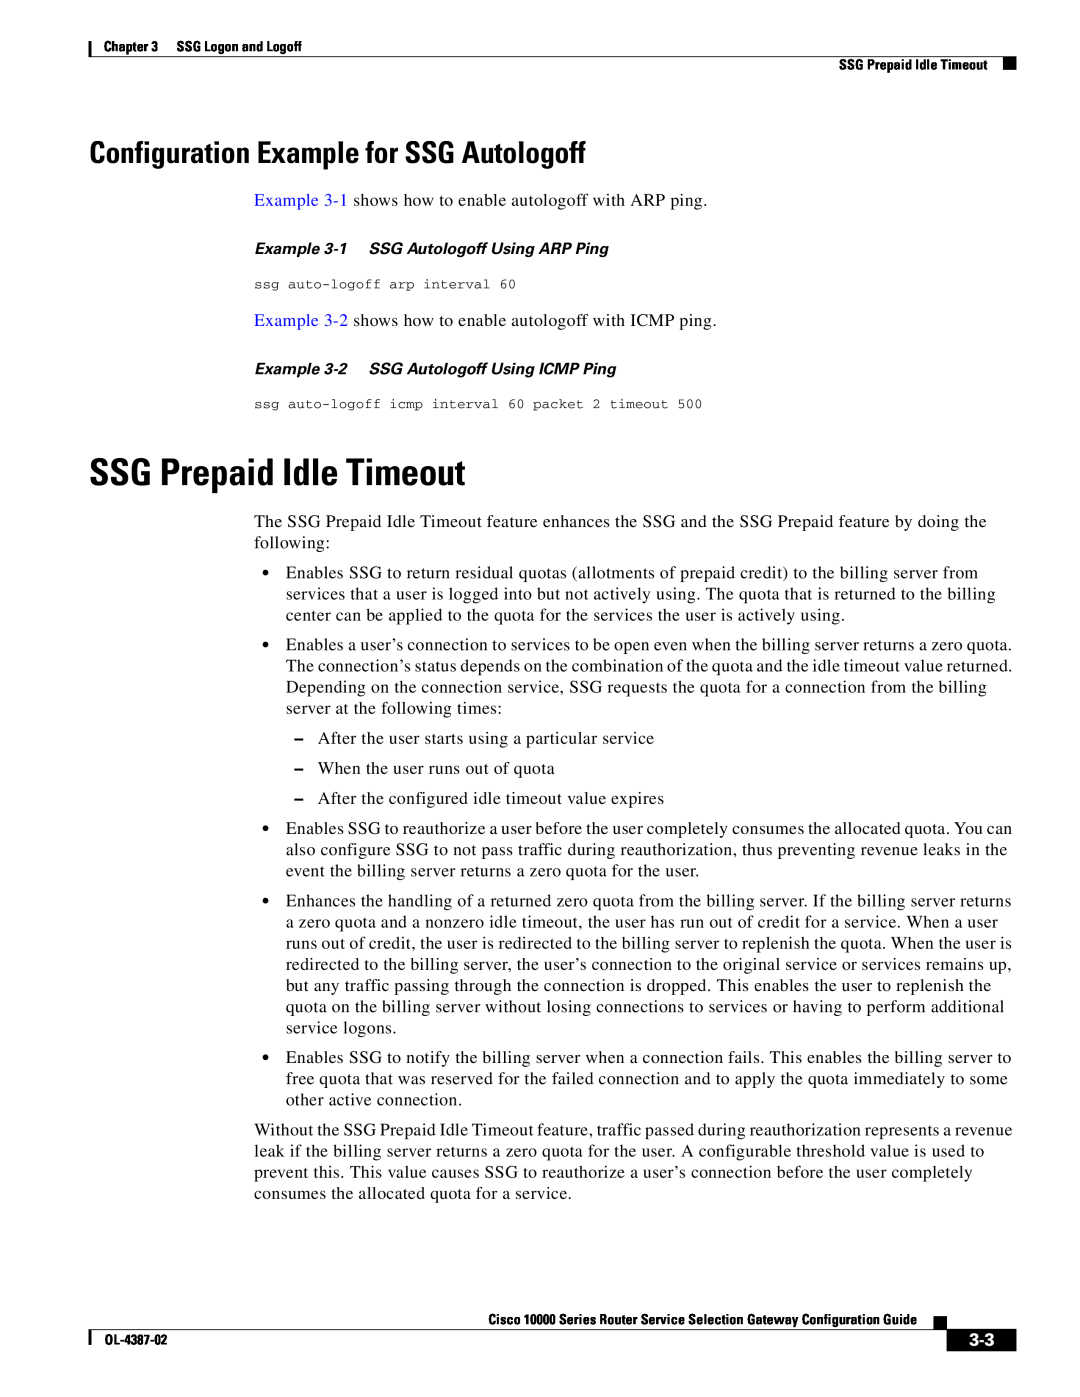 Cisco Systems OL-4387-02 manual SSG Prepaid Idle Timeout, Configuration Example for SSG Autologoff 